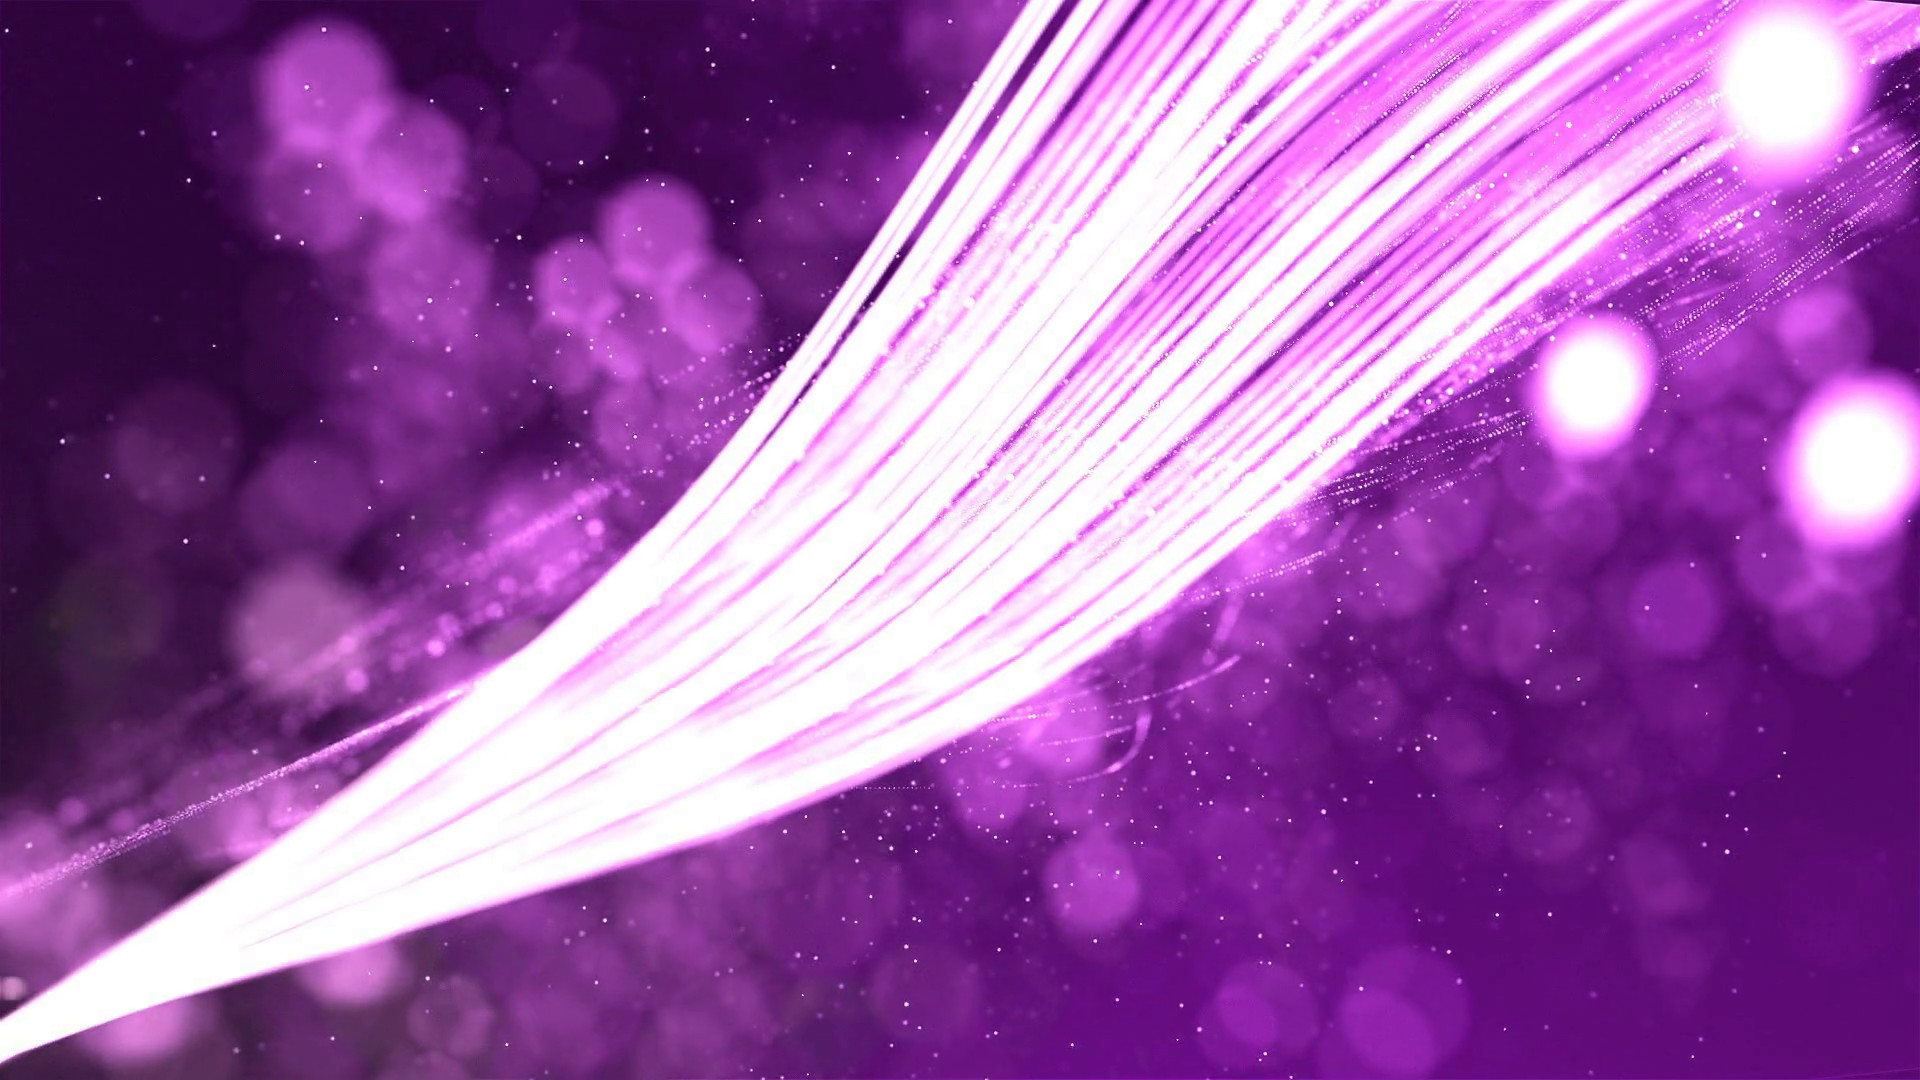 1920x1080 HD Loopable Background with nice abstract purple lines Motion Background -  VideoBlocks